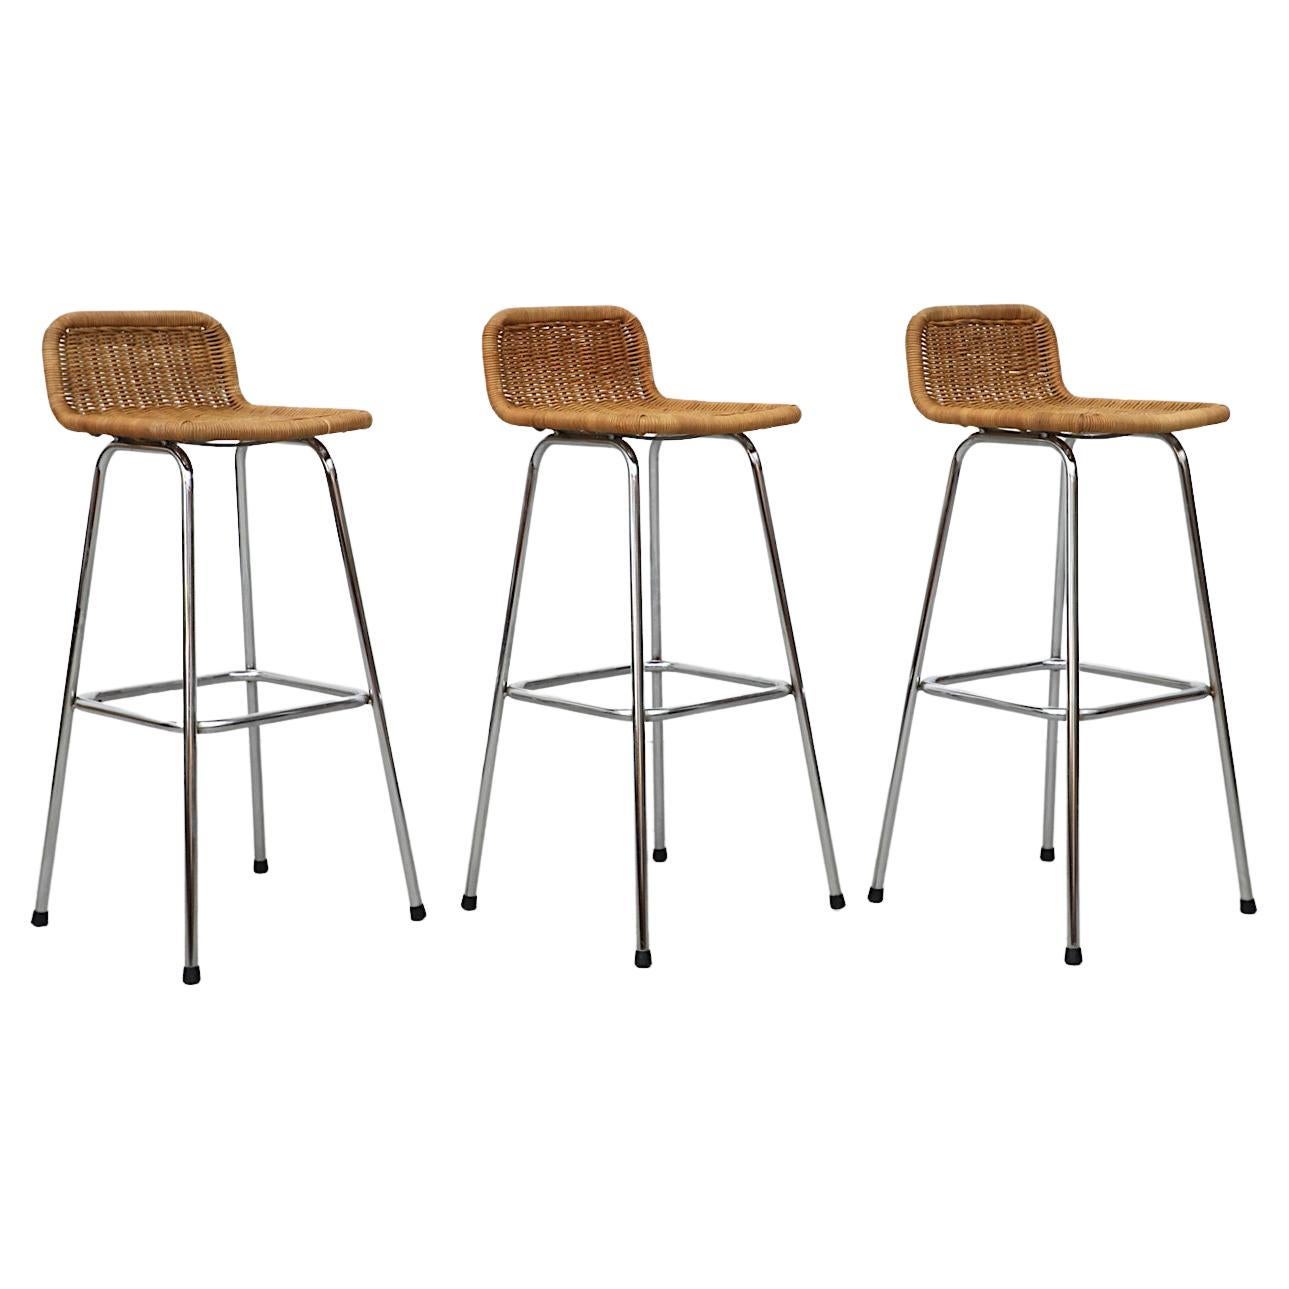 Set of 3 Charlotte Perriand Style Bar Stools